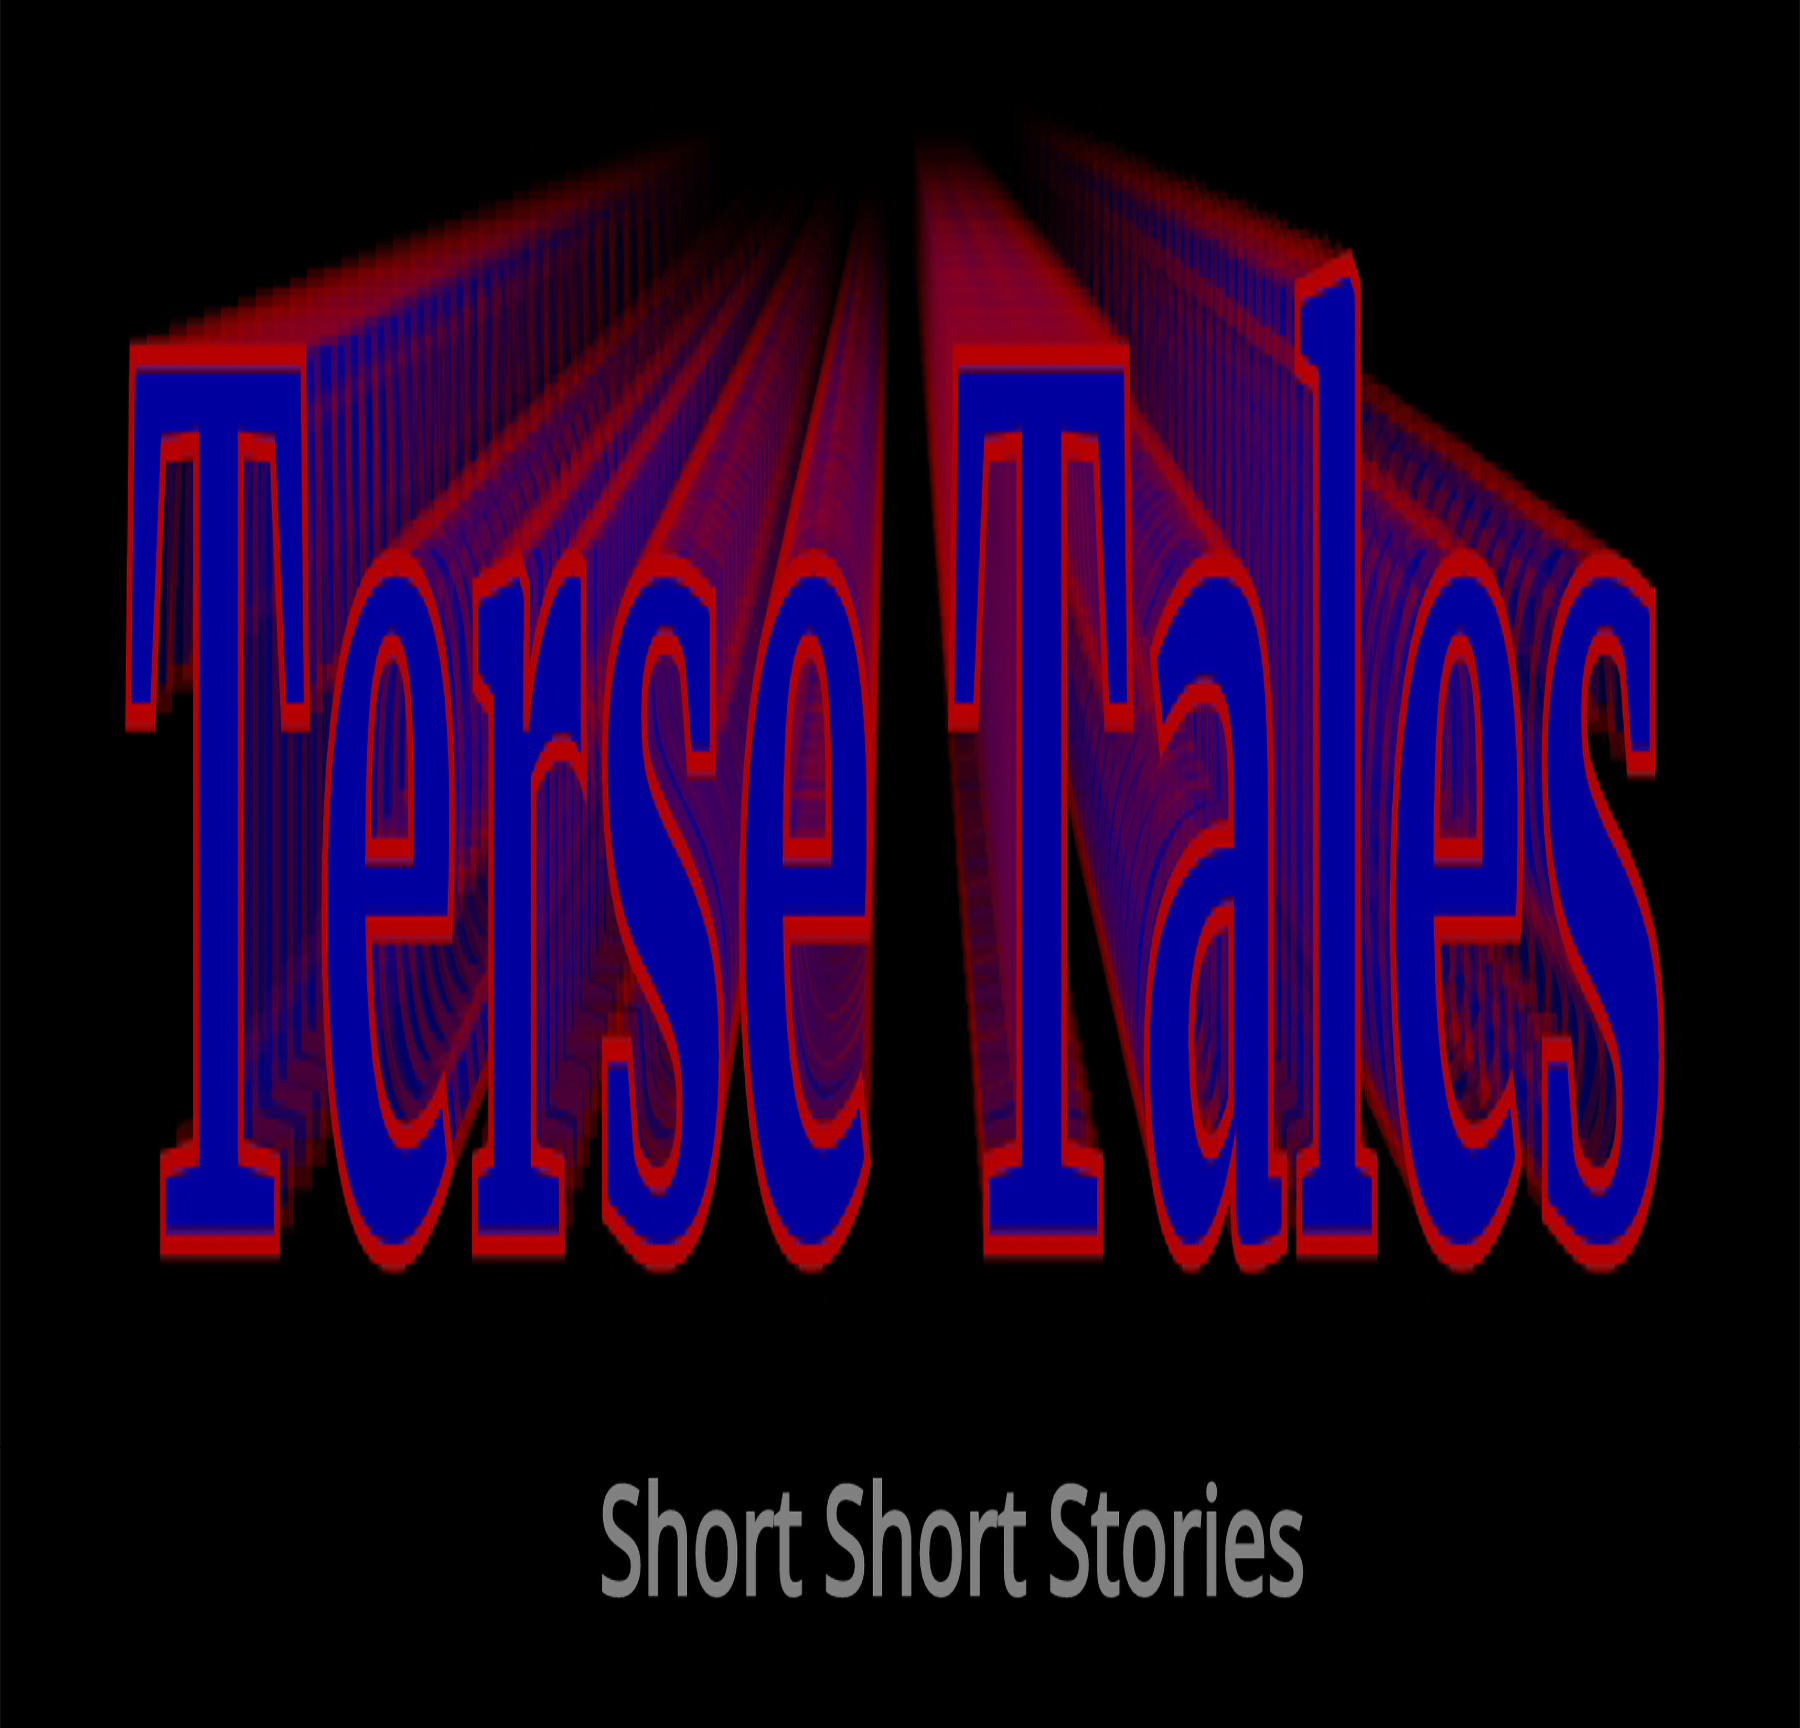 Terse Tales letters as expanding zoom with subtitle text Short Short Stories